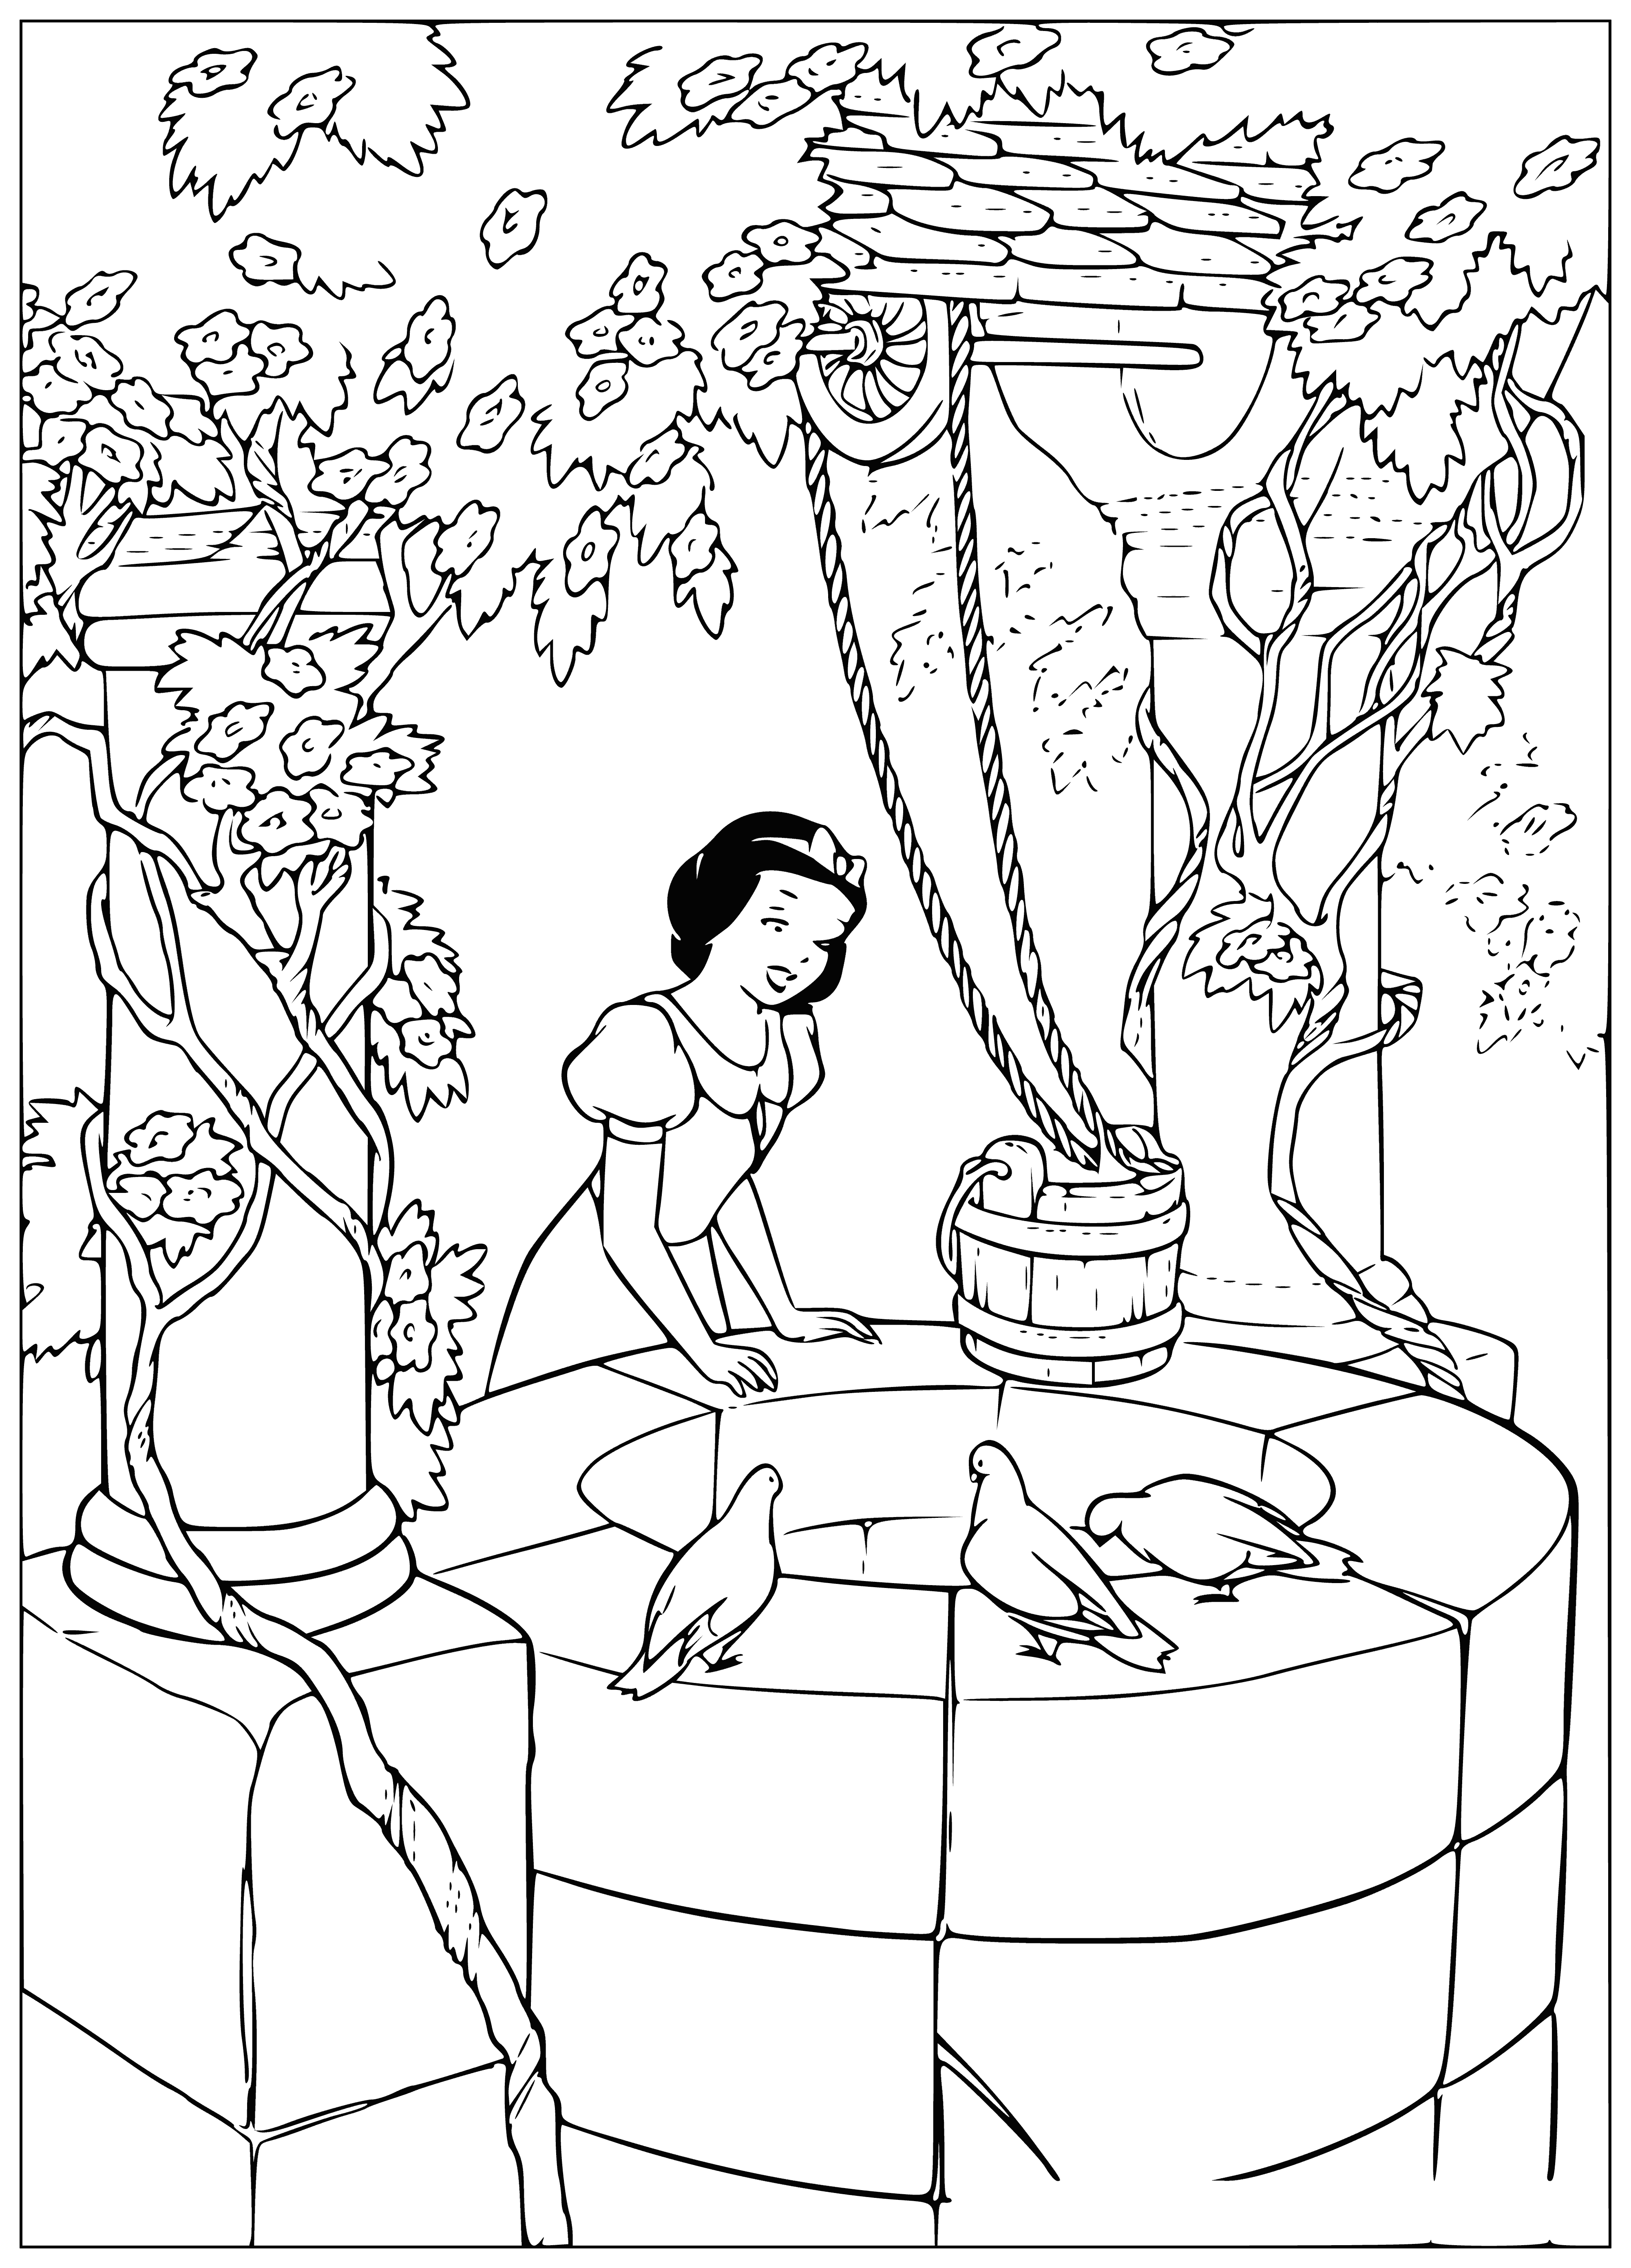 coloring page: Snow White kneels at a well, wearing blue and white, a bun of black; seven dwarves stare adoringly.